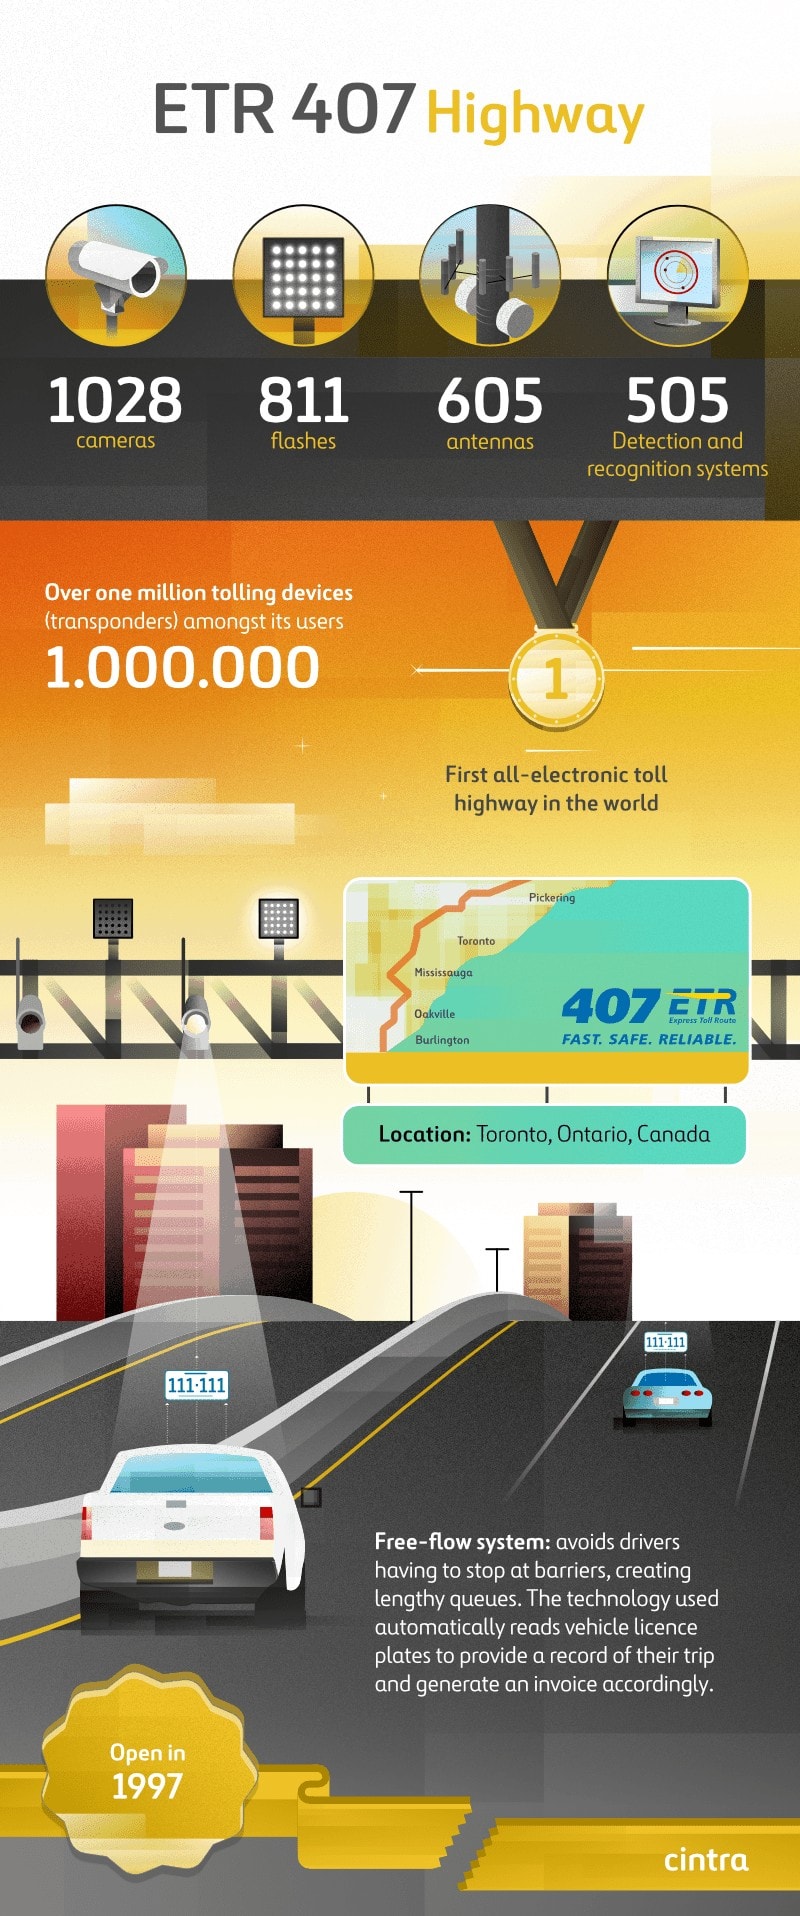 Infography of the 407 ETR Highway in Canada